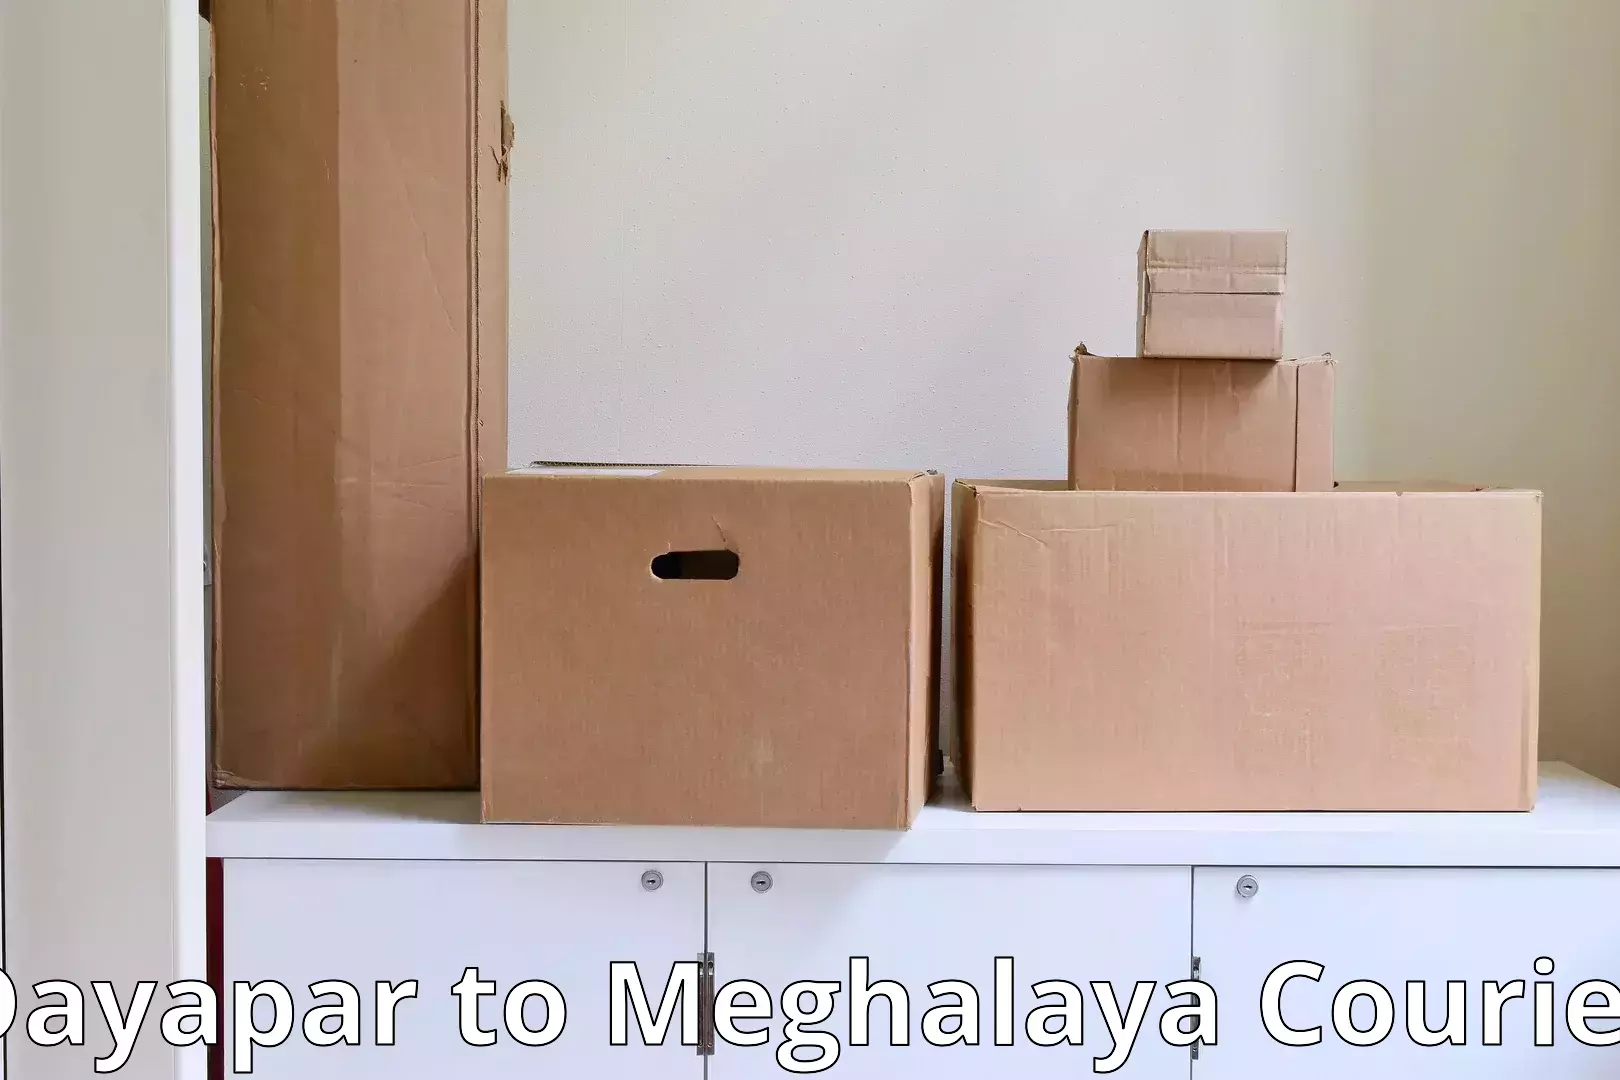 Home goods moving company in Dayapar to South Garo Hills